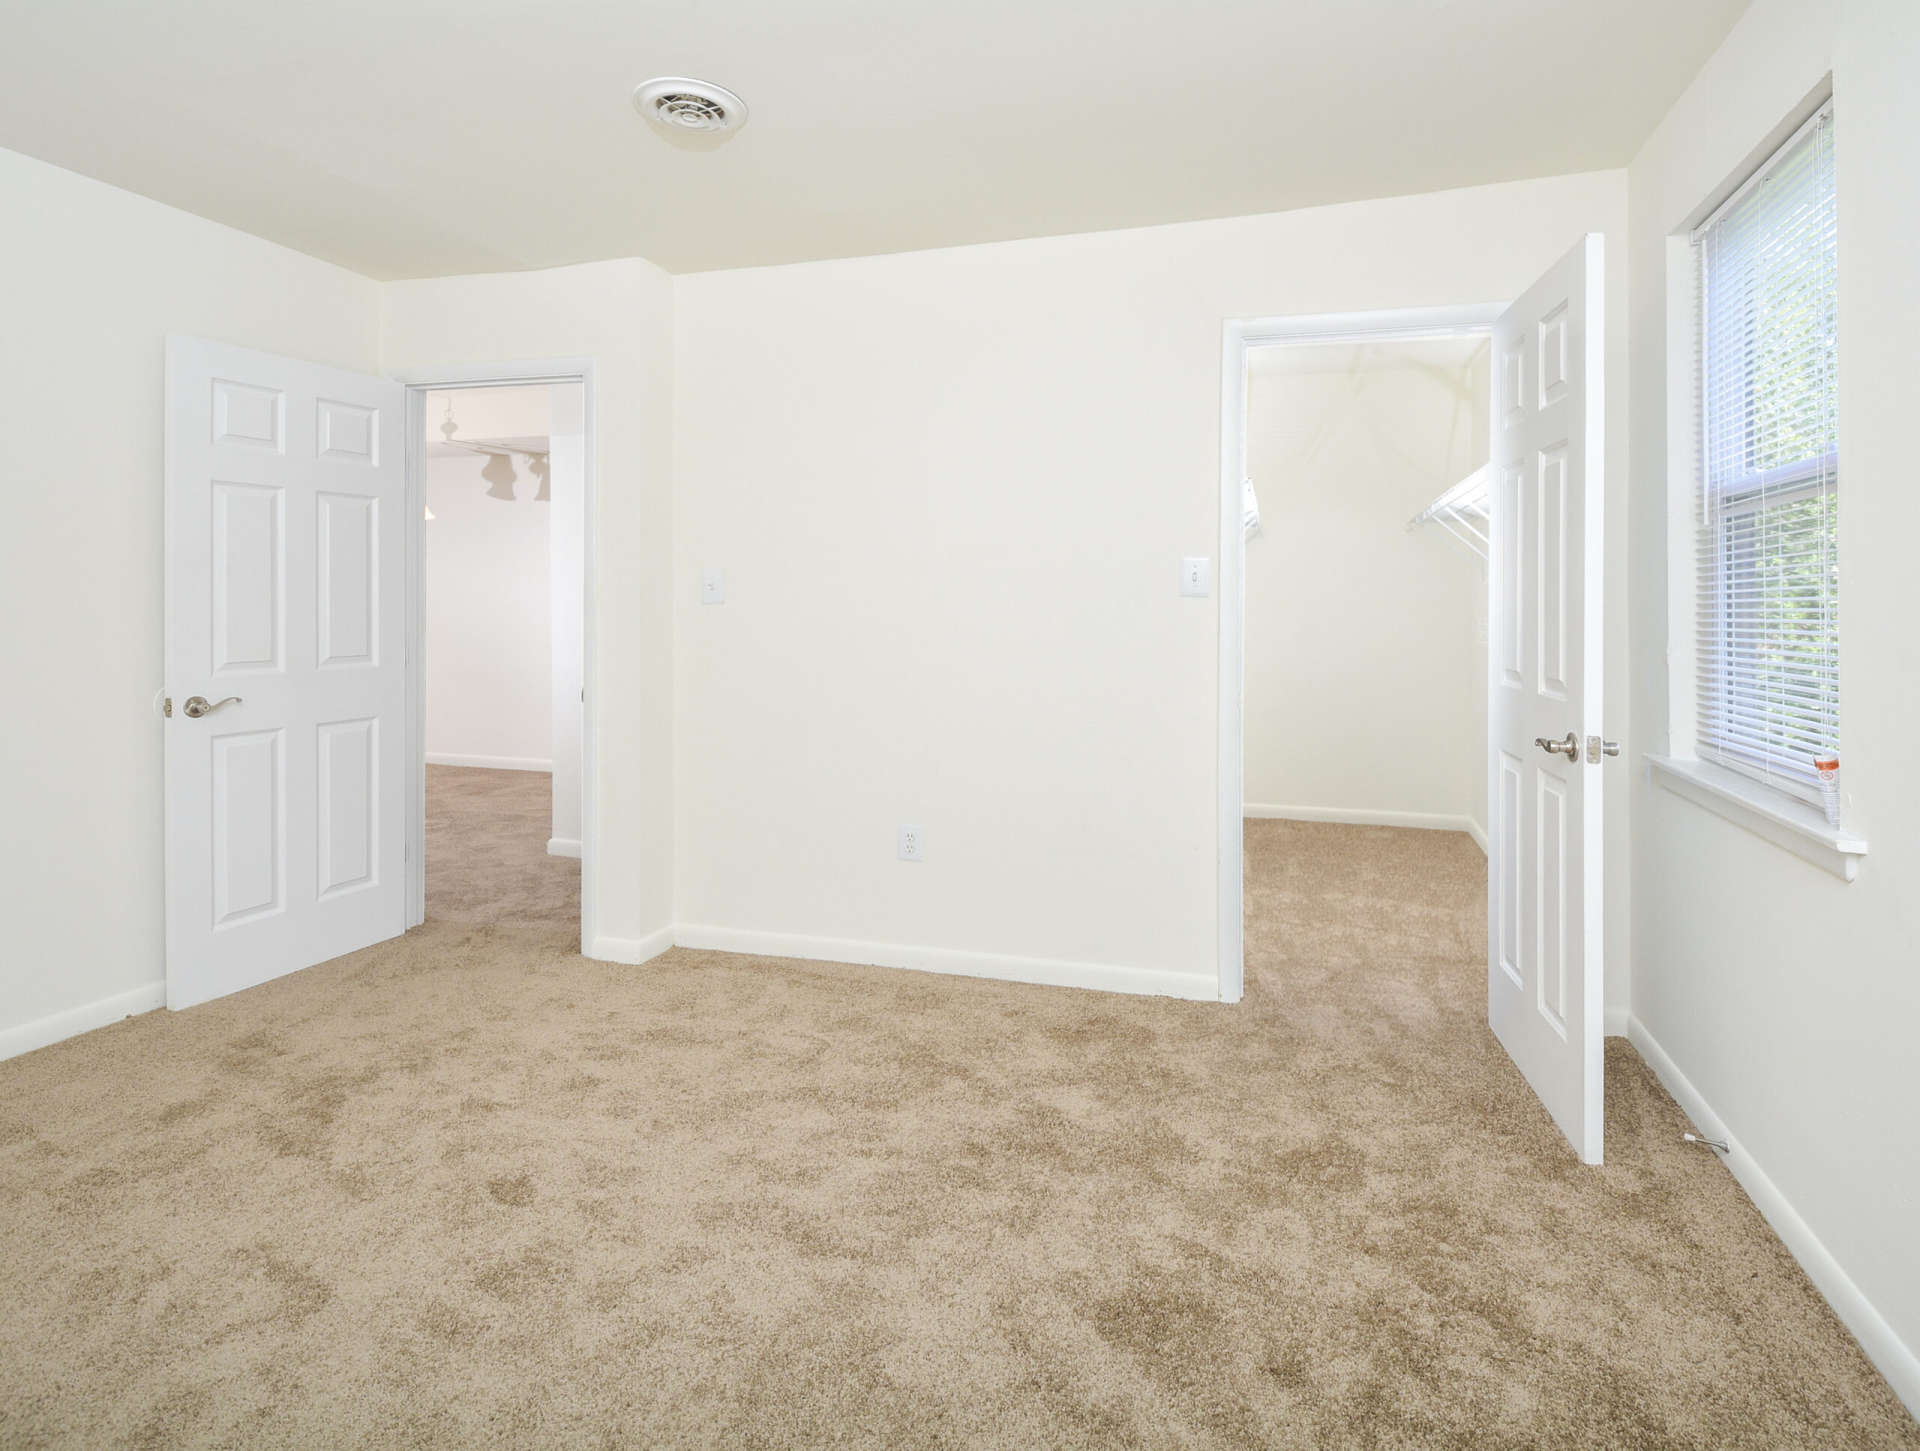 Carpeted bedroom with a walk-in closet and a window in an apartment in Newark, DE.